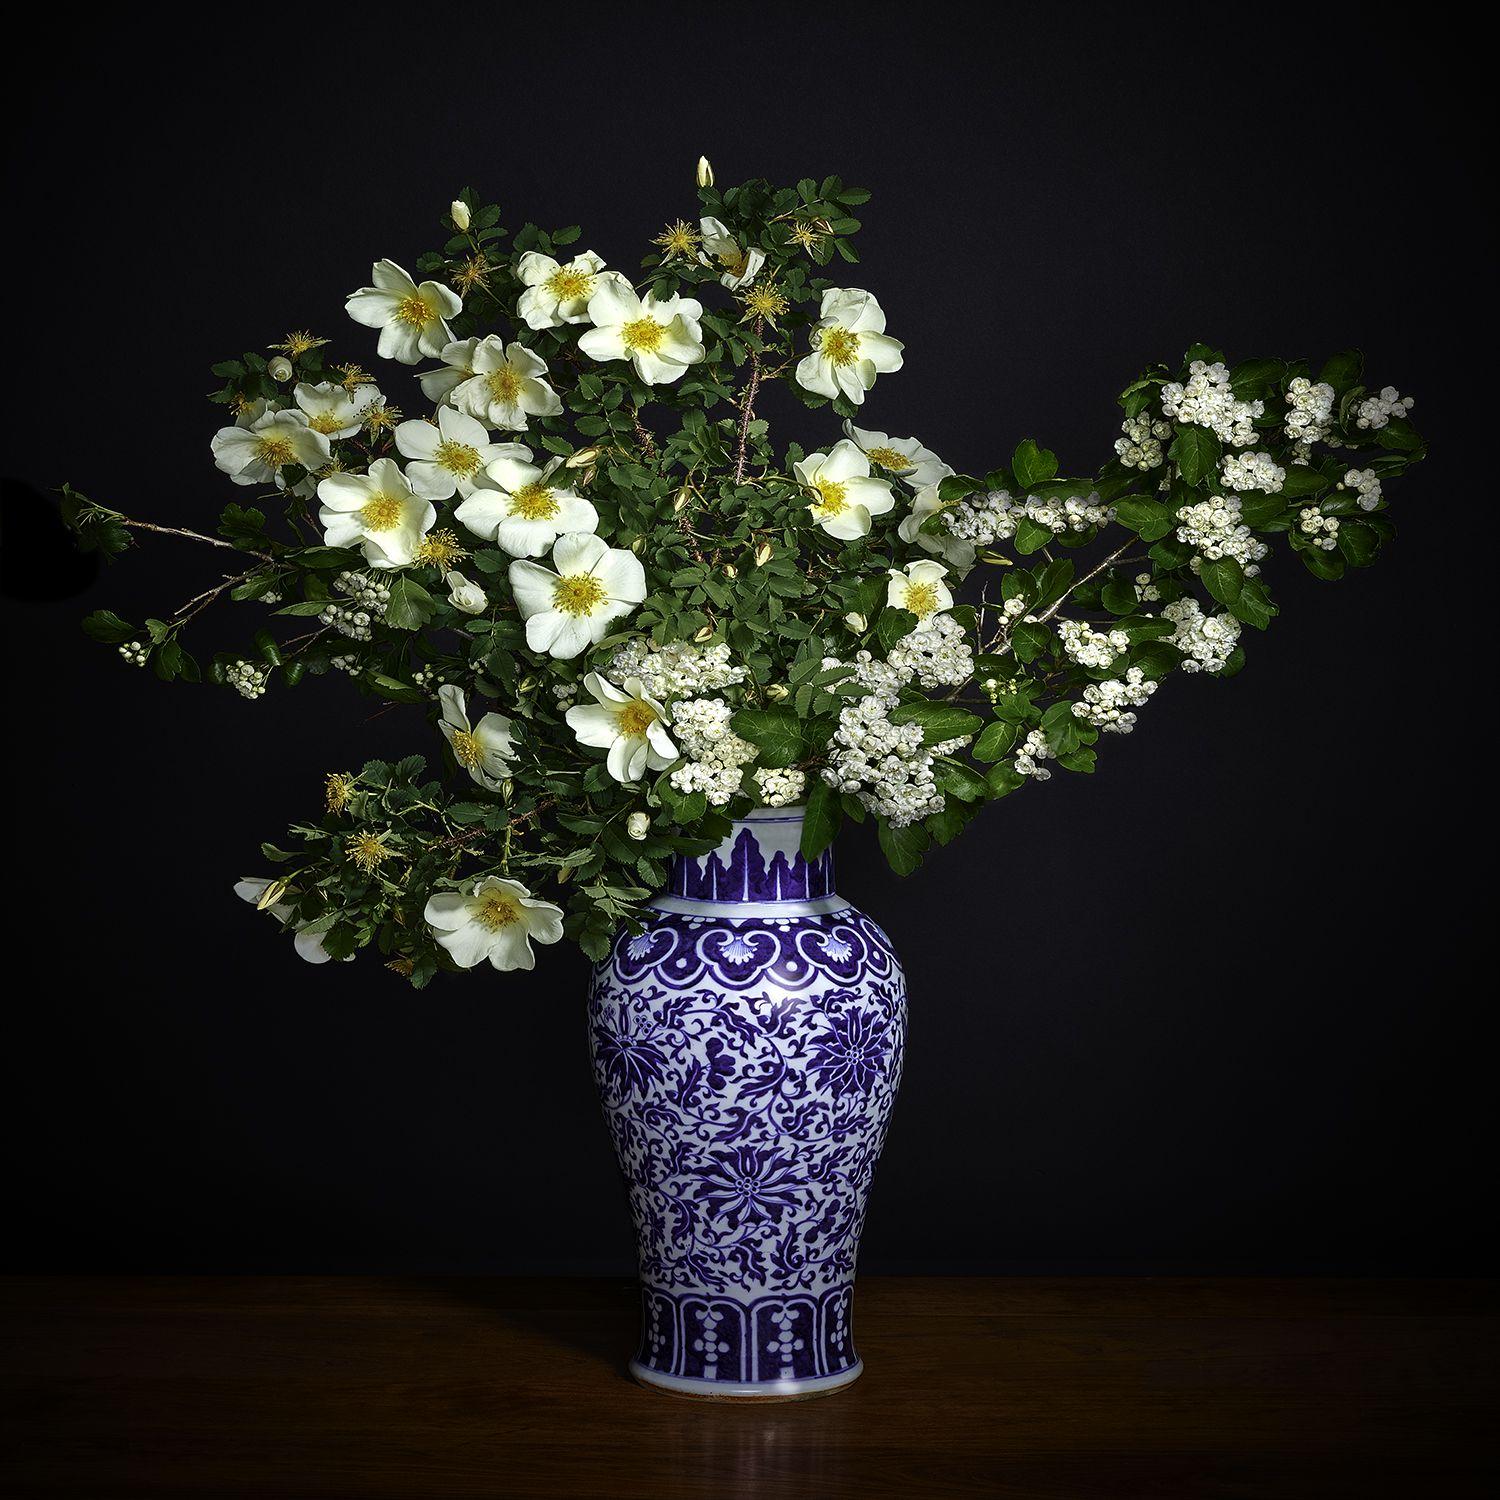 White Hawthorne and White Shrub Rose in a Blue and White Chinese Vessel - Photograph by T.M. Glass